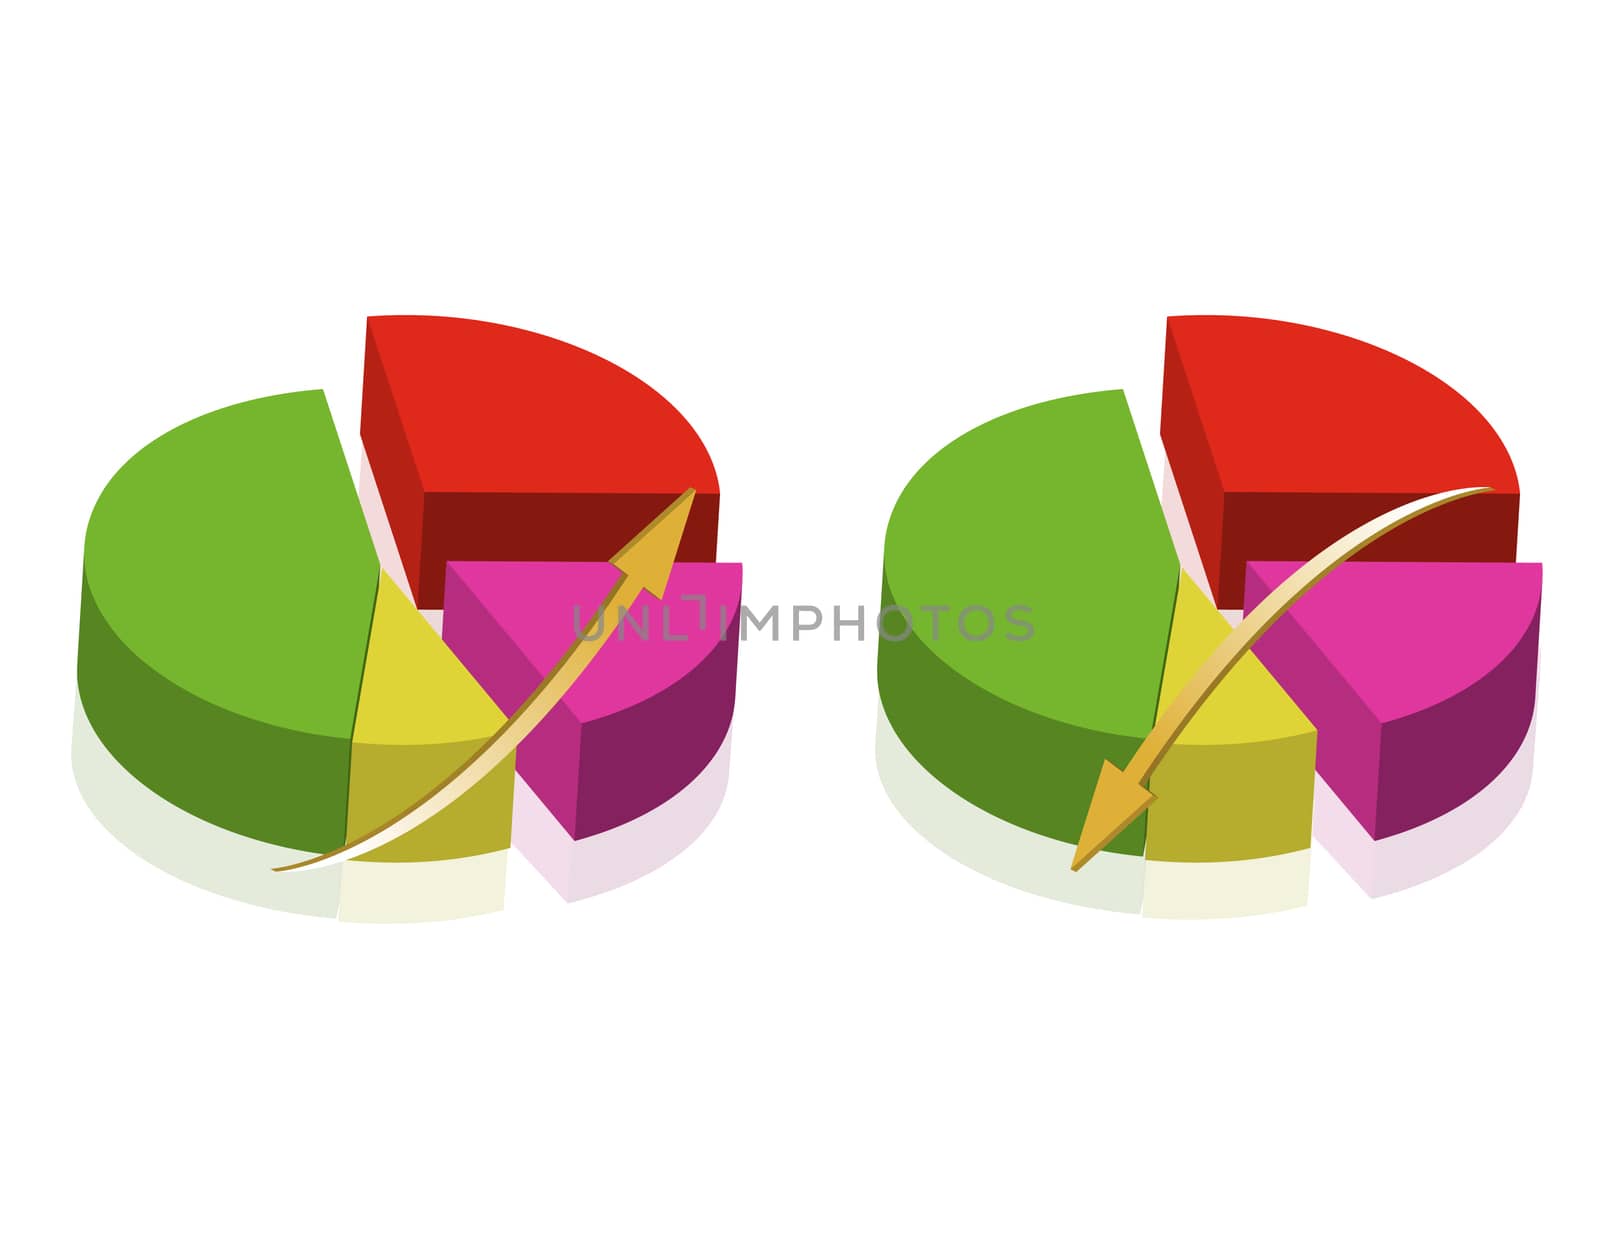 Colorful Pie charts templates isolated over a white background.